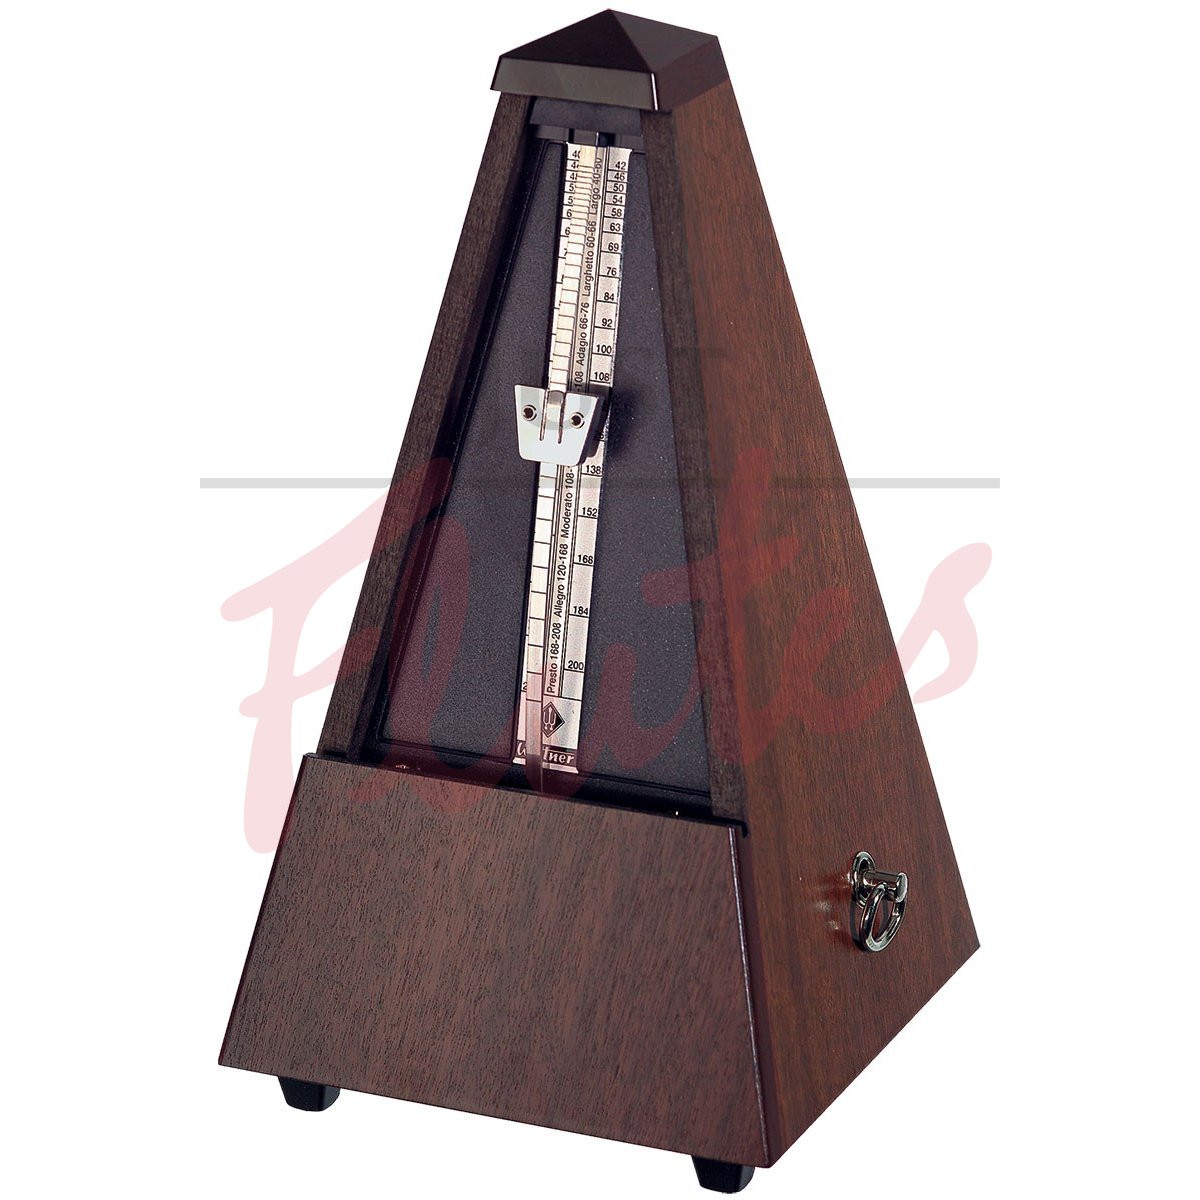 Wittner 814 Pyramid Metronome With Bell, Solid Wood, Highly-Polished Walnut